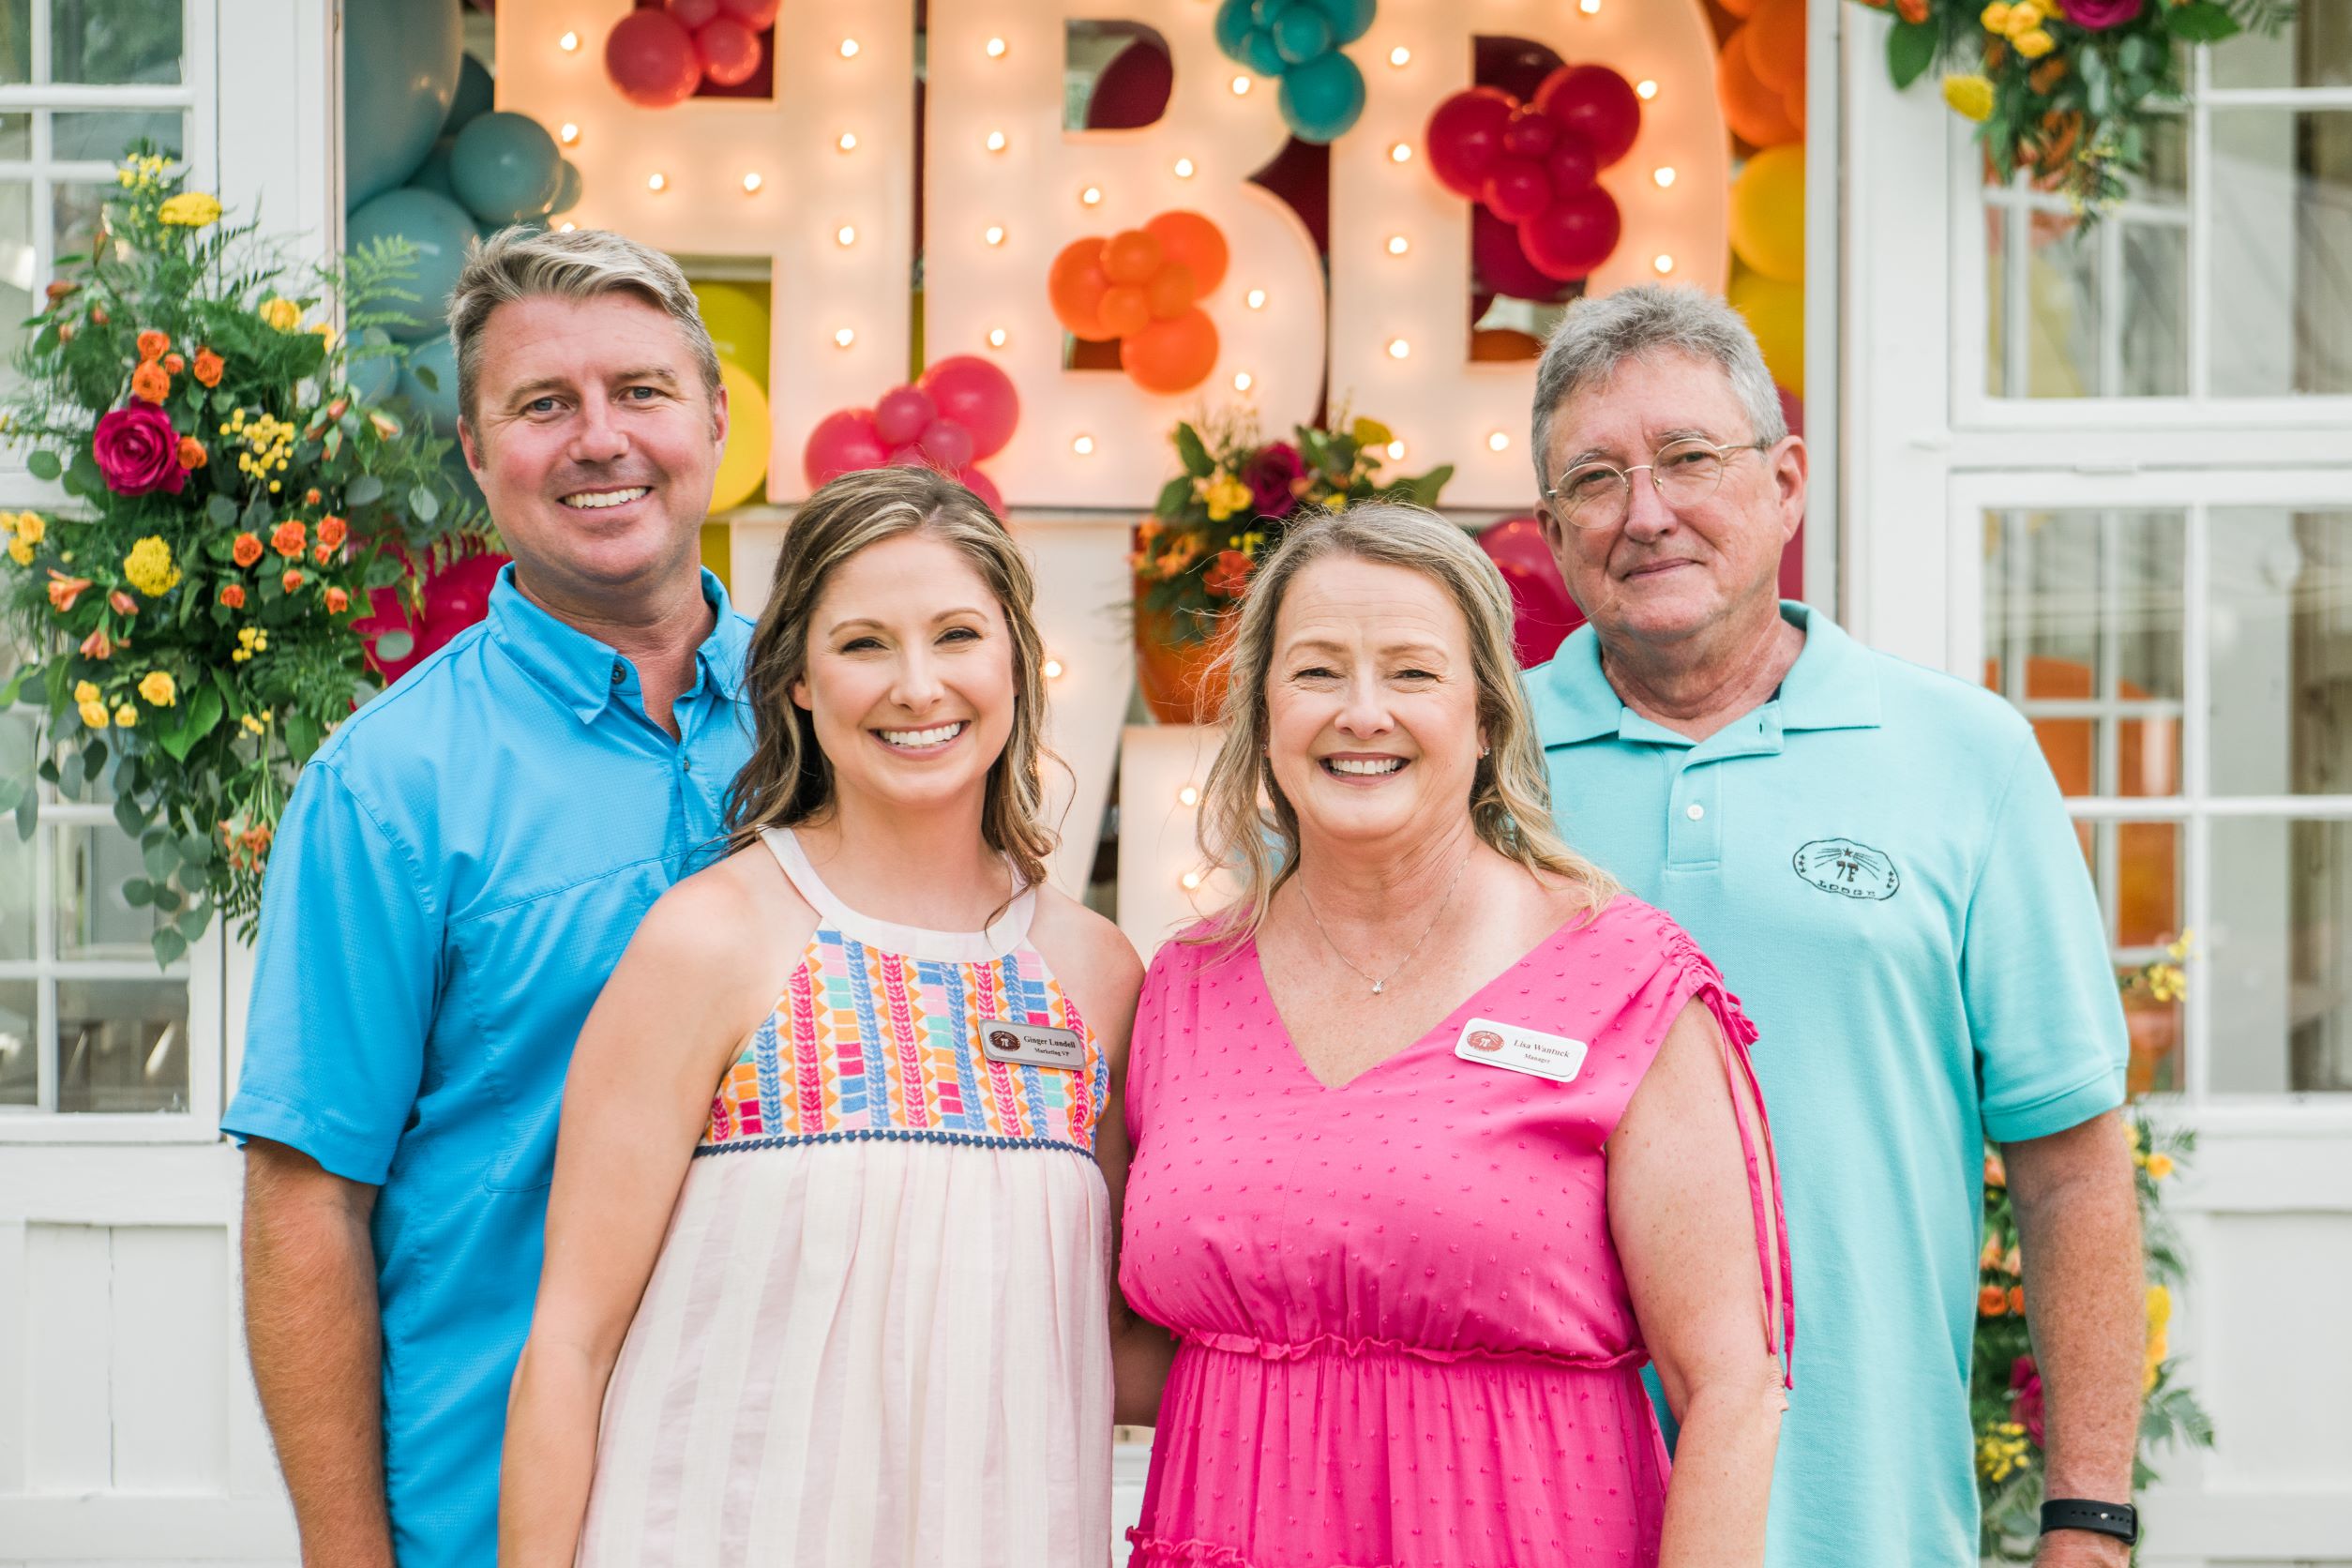 The owners of 7F Lodge standing in front of their Chapel for their 25th Anniversary dressed in hues of pastel colors and smiling at the camera - College Station Wedding Venue